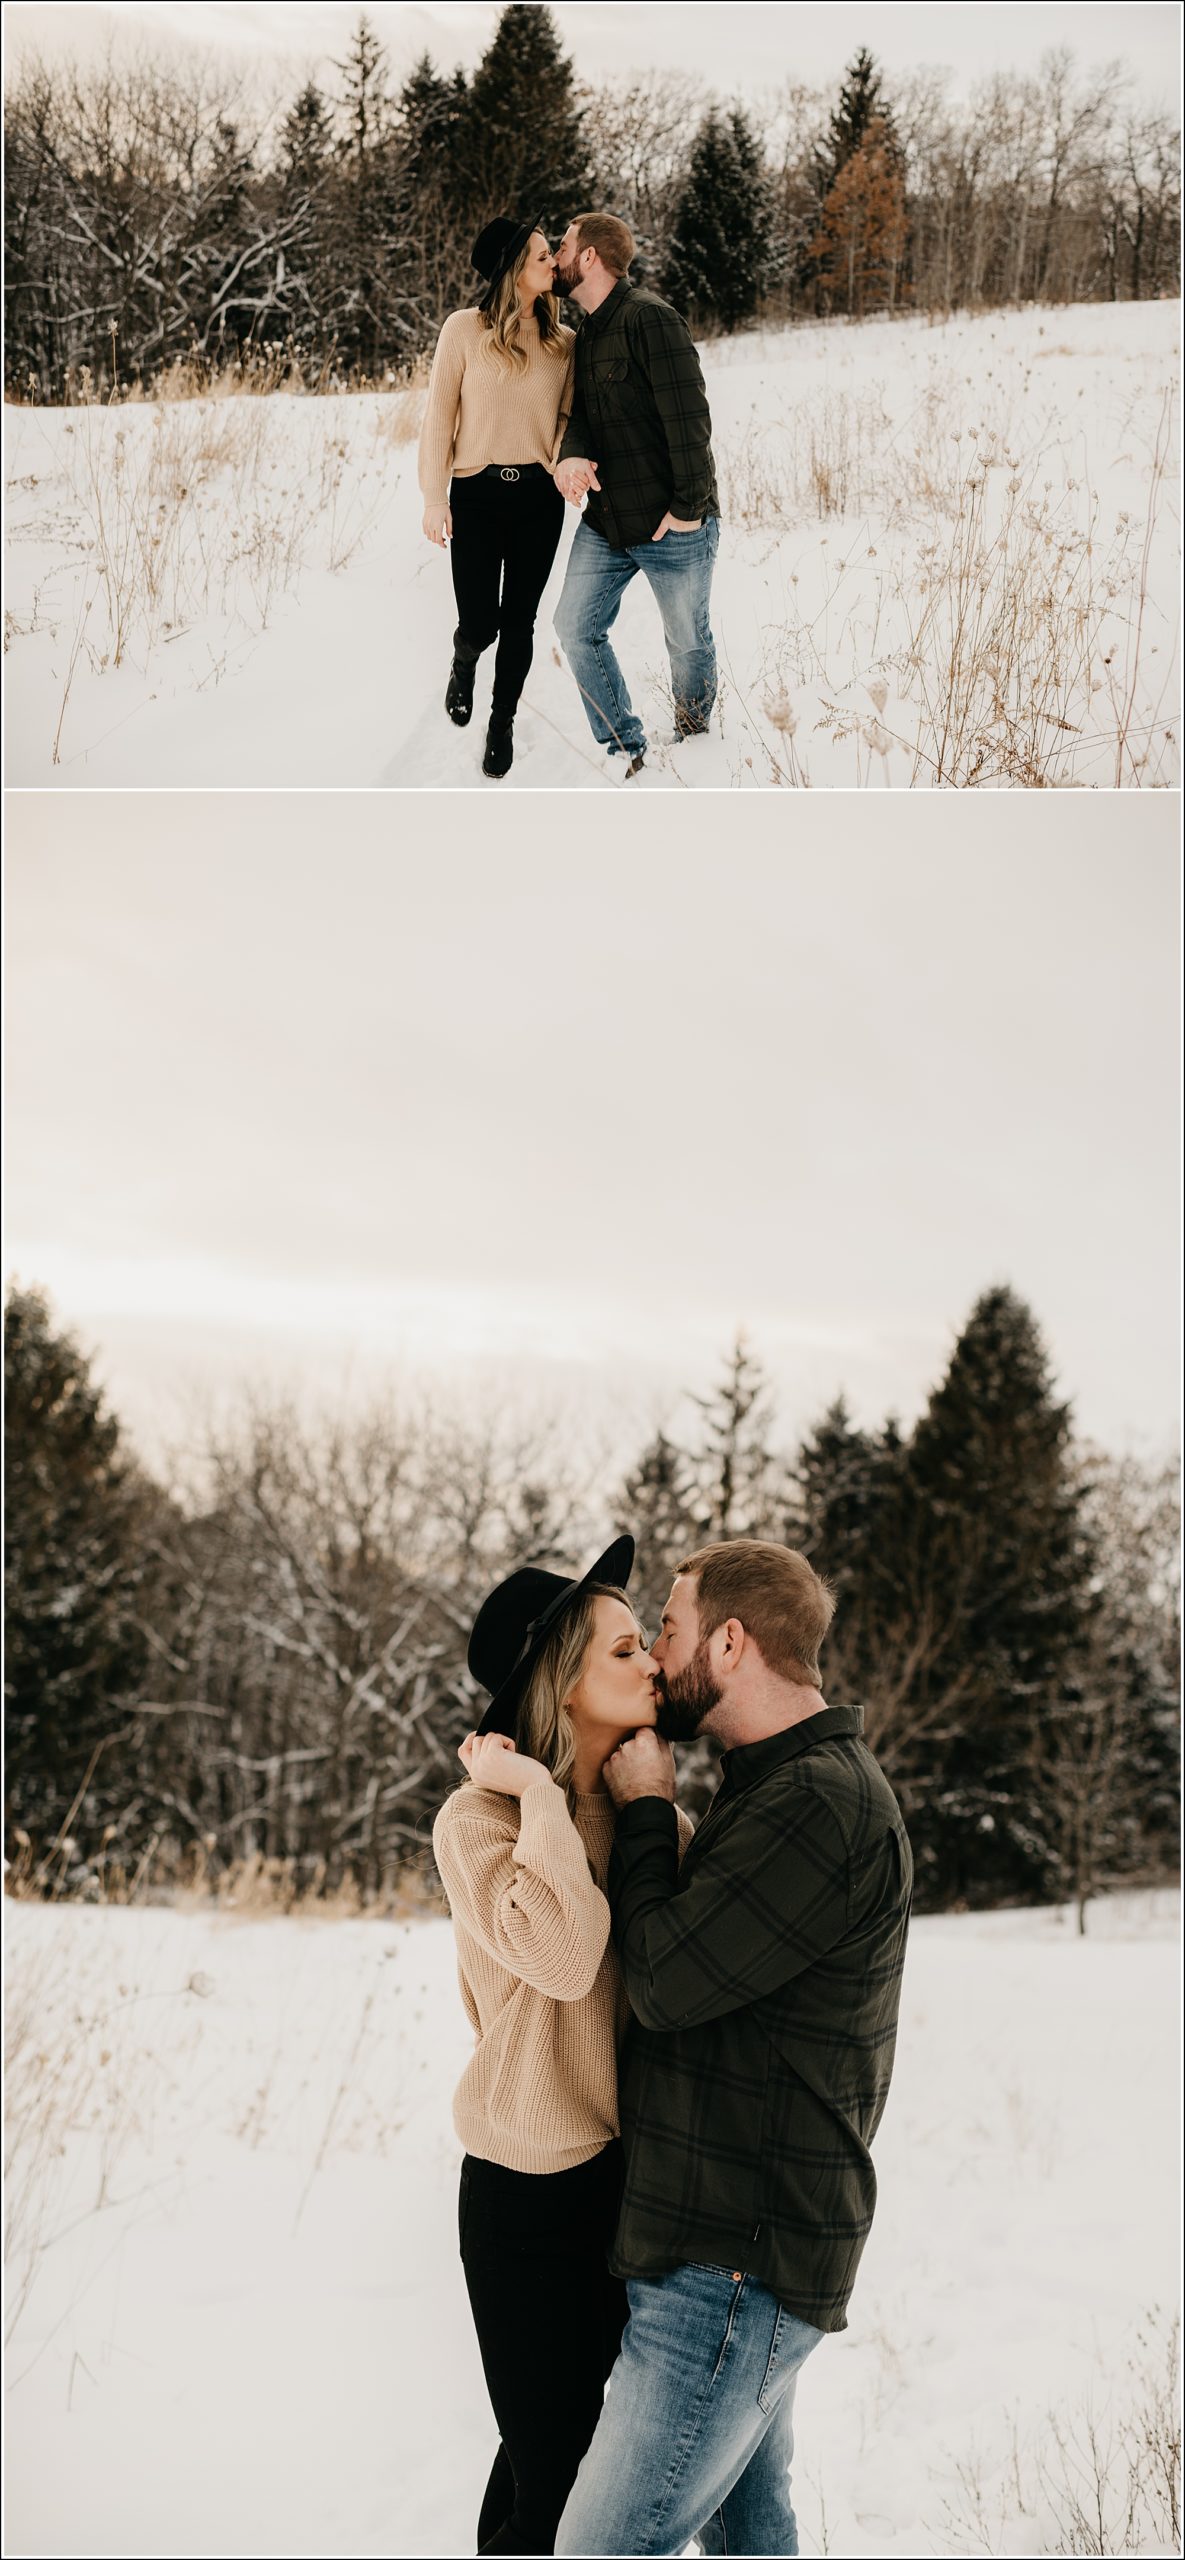 engagement session couple is walking and kissing her hand on her hat his hand under her chin in the snow with a mix of trees with snow in the background